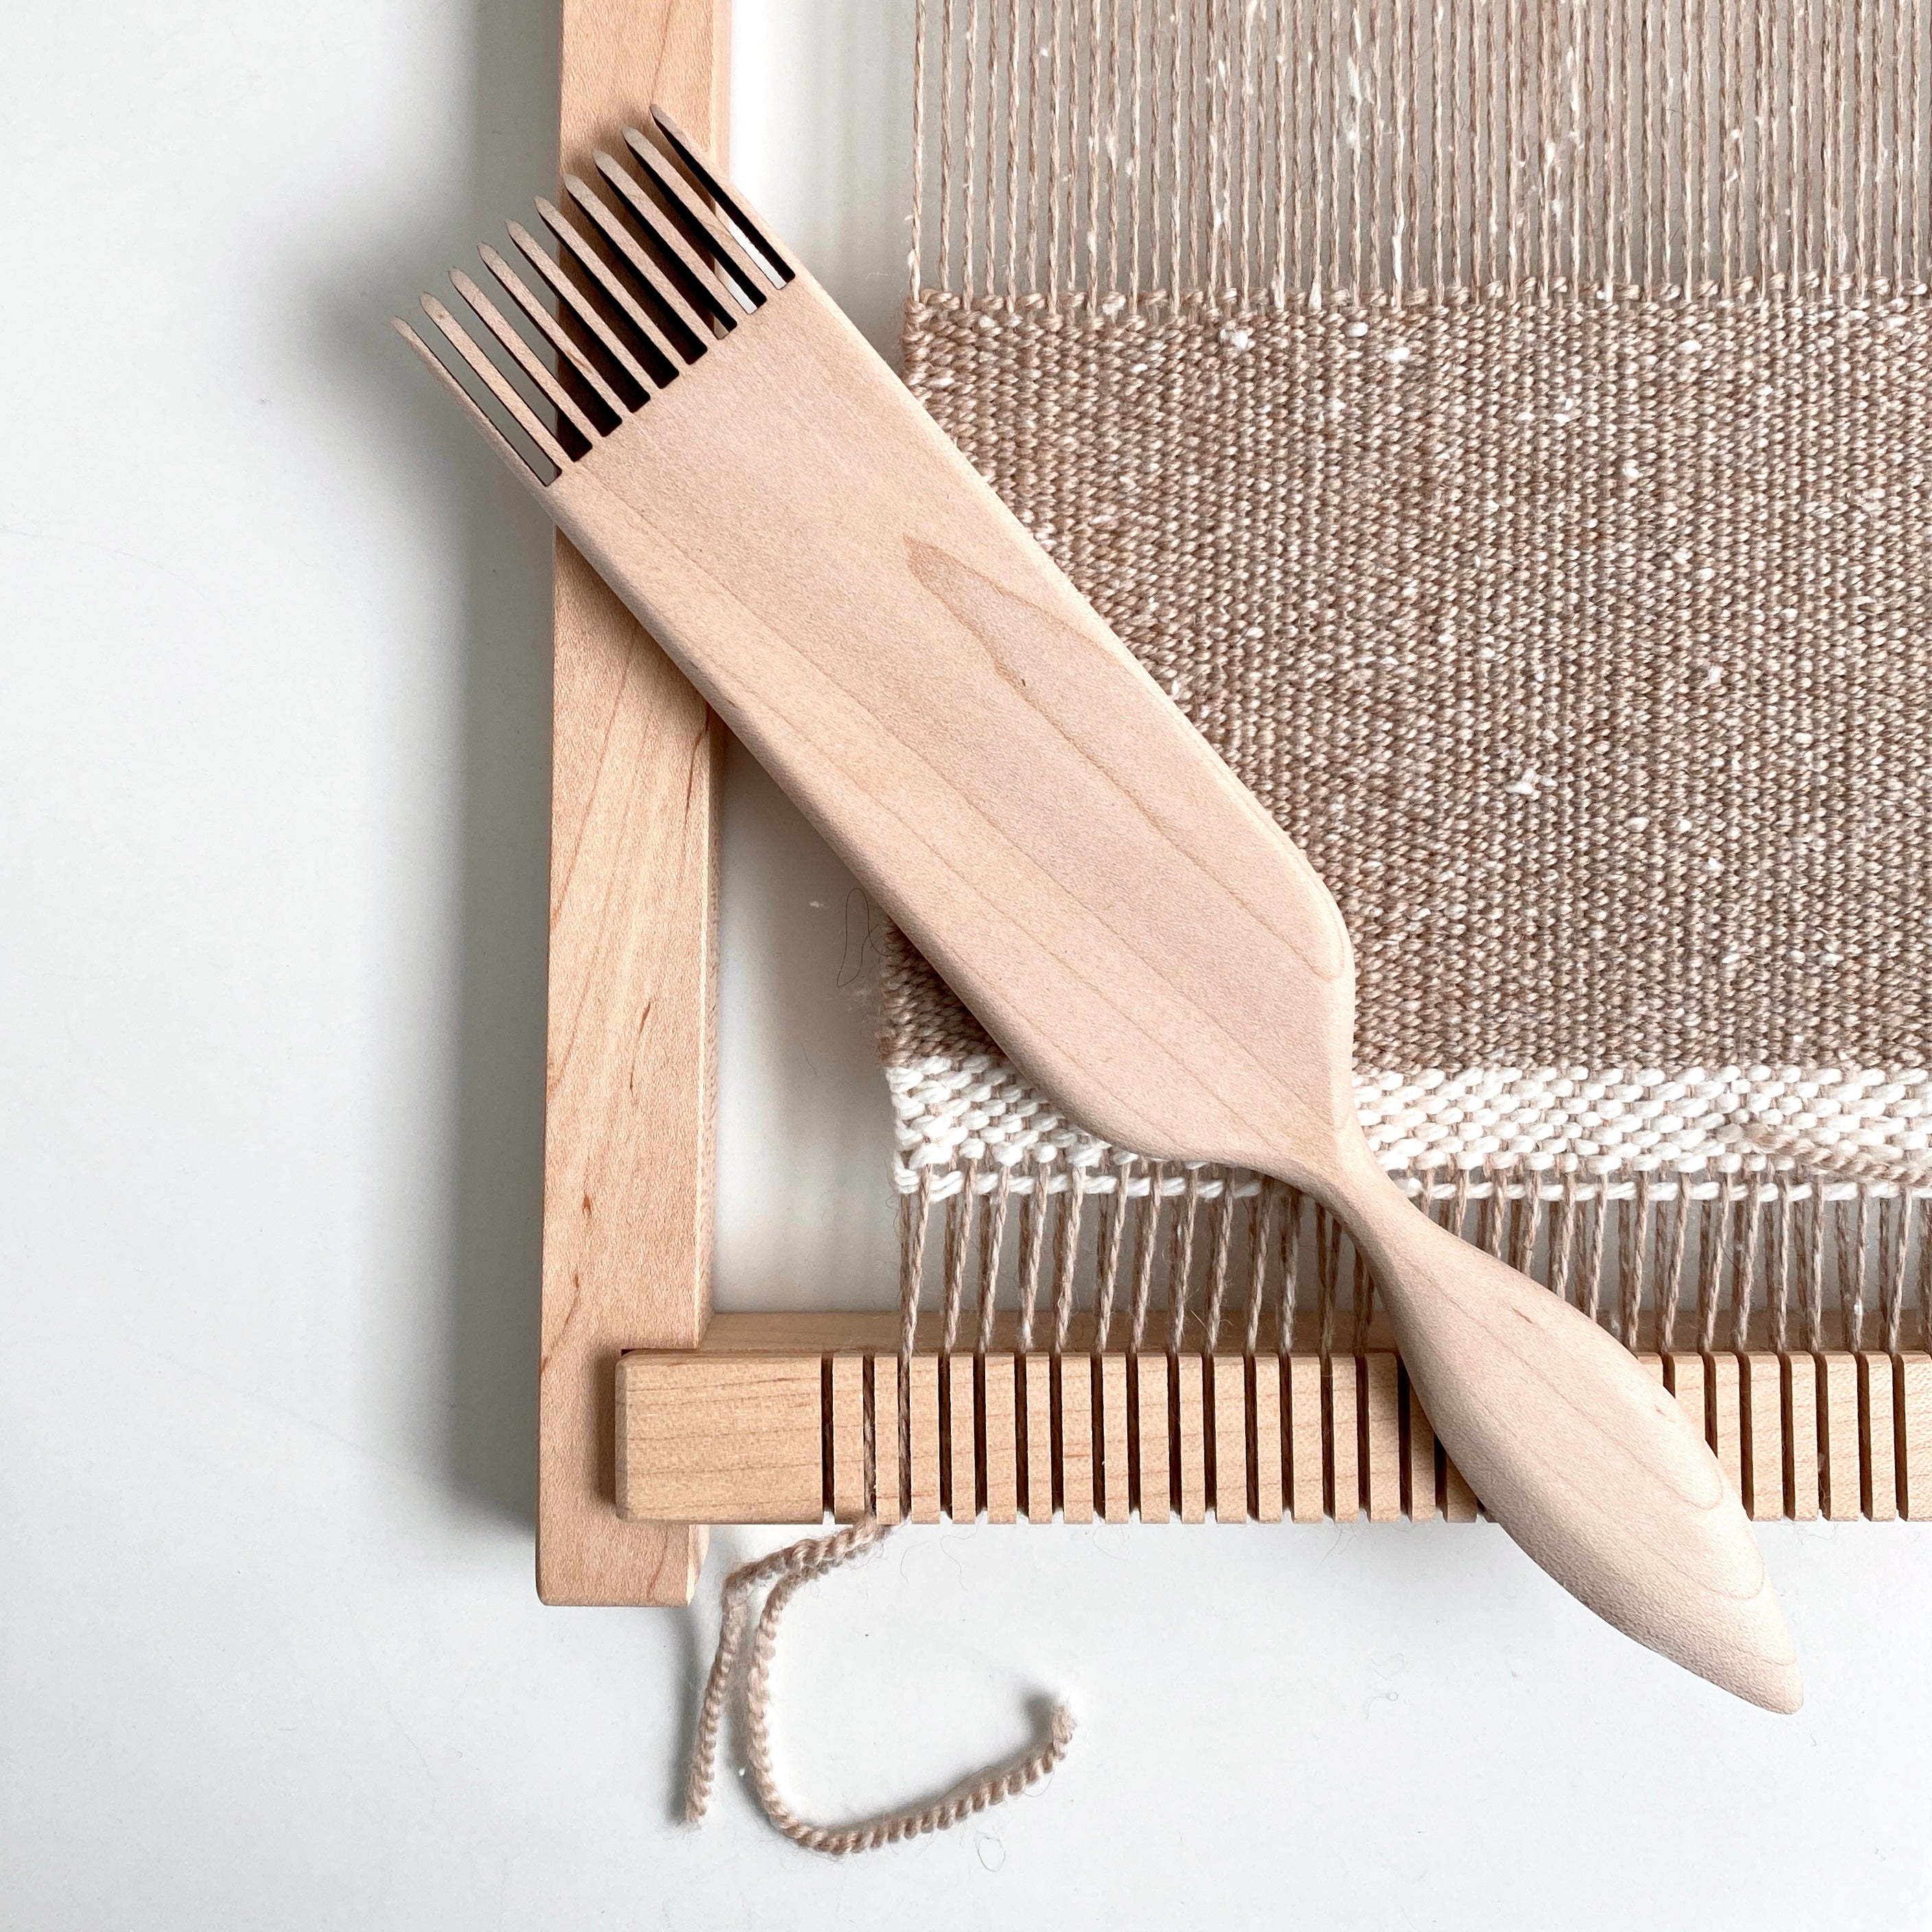 Flax & Twine 4" Comb / Beater in Walnut or Maple